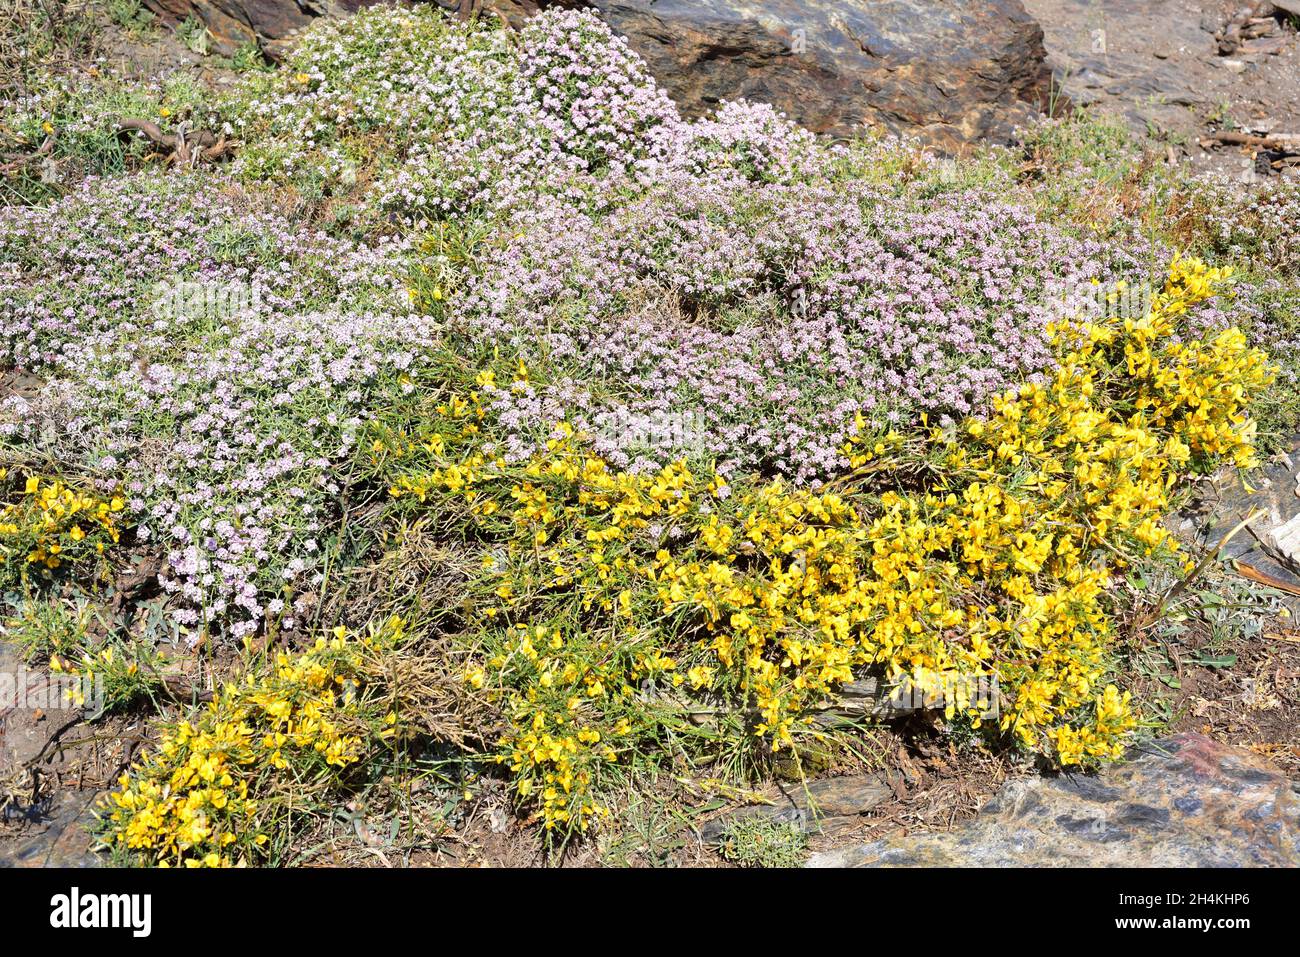 Piorno negro (Cytisus galianoi) in the foreground and piorno rosa (Hormathophylla spinosa). Cytisus galianoi is endemic to Sierra Nevada and Stock Photo